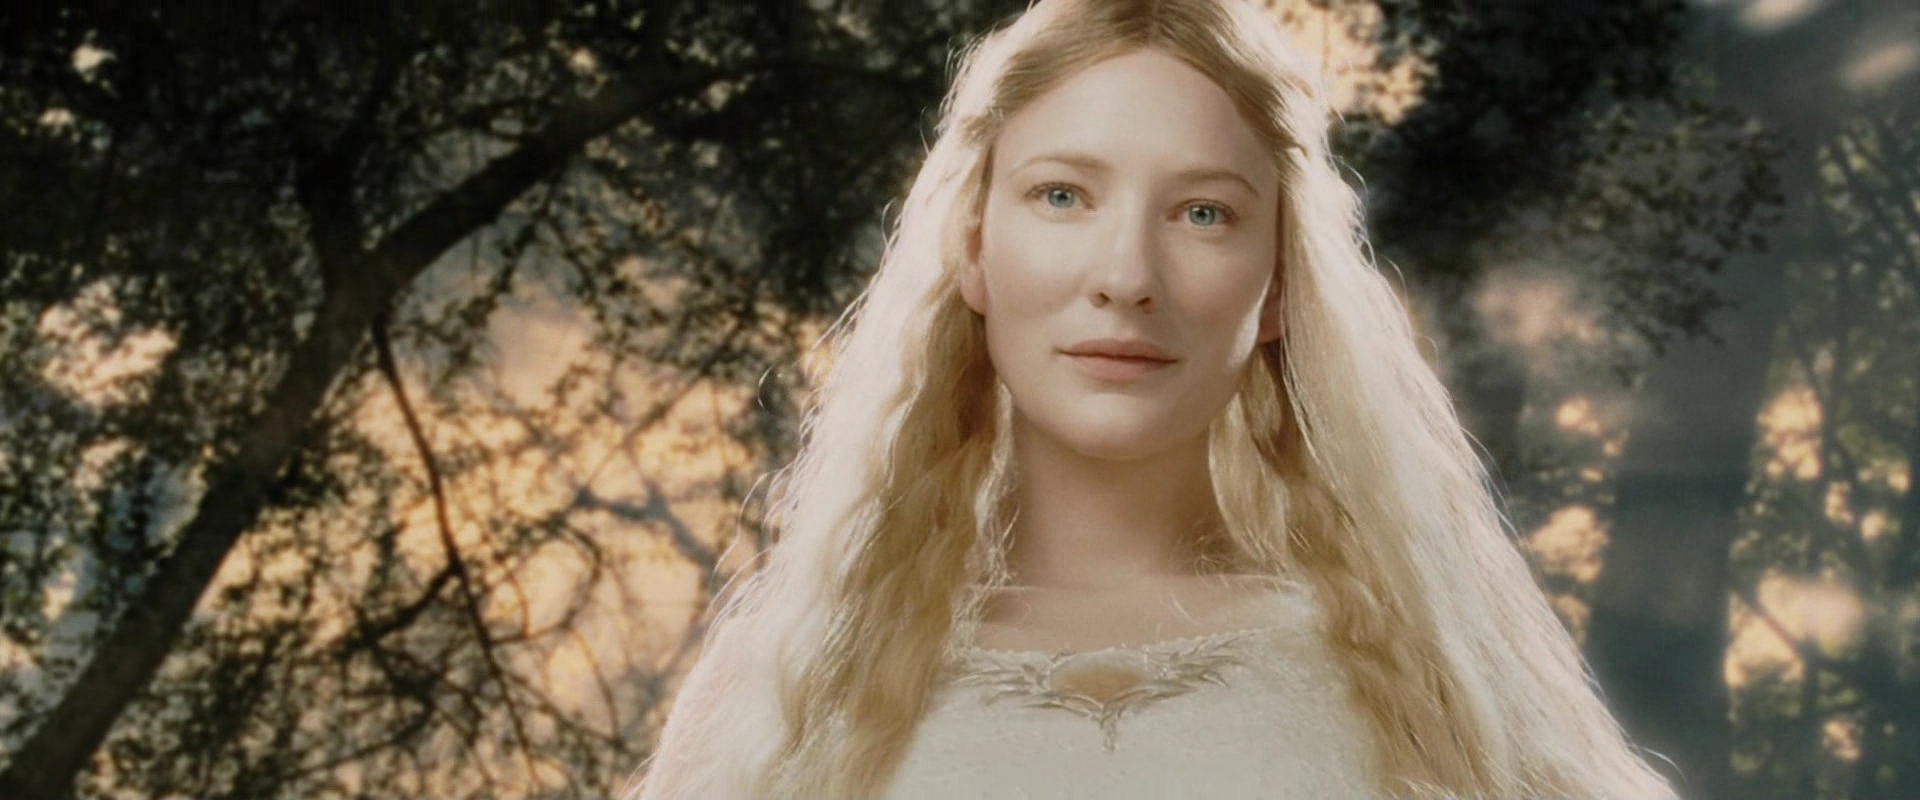 Cate Blanchett in The Lord of the Rings: The Return of the King (2003)